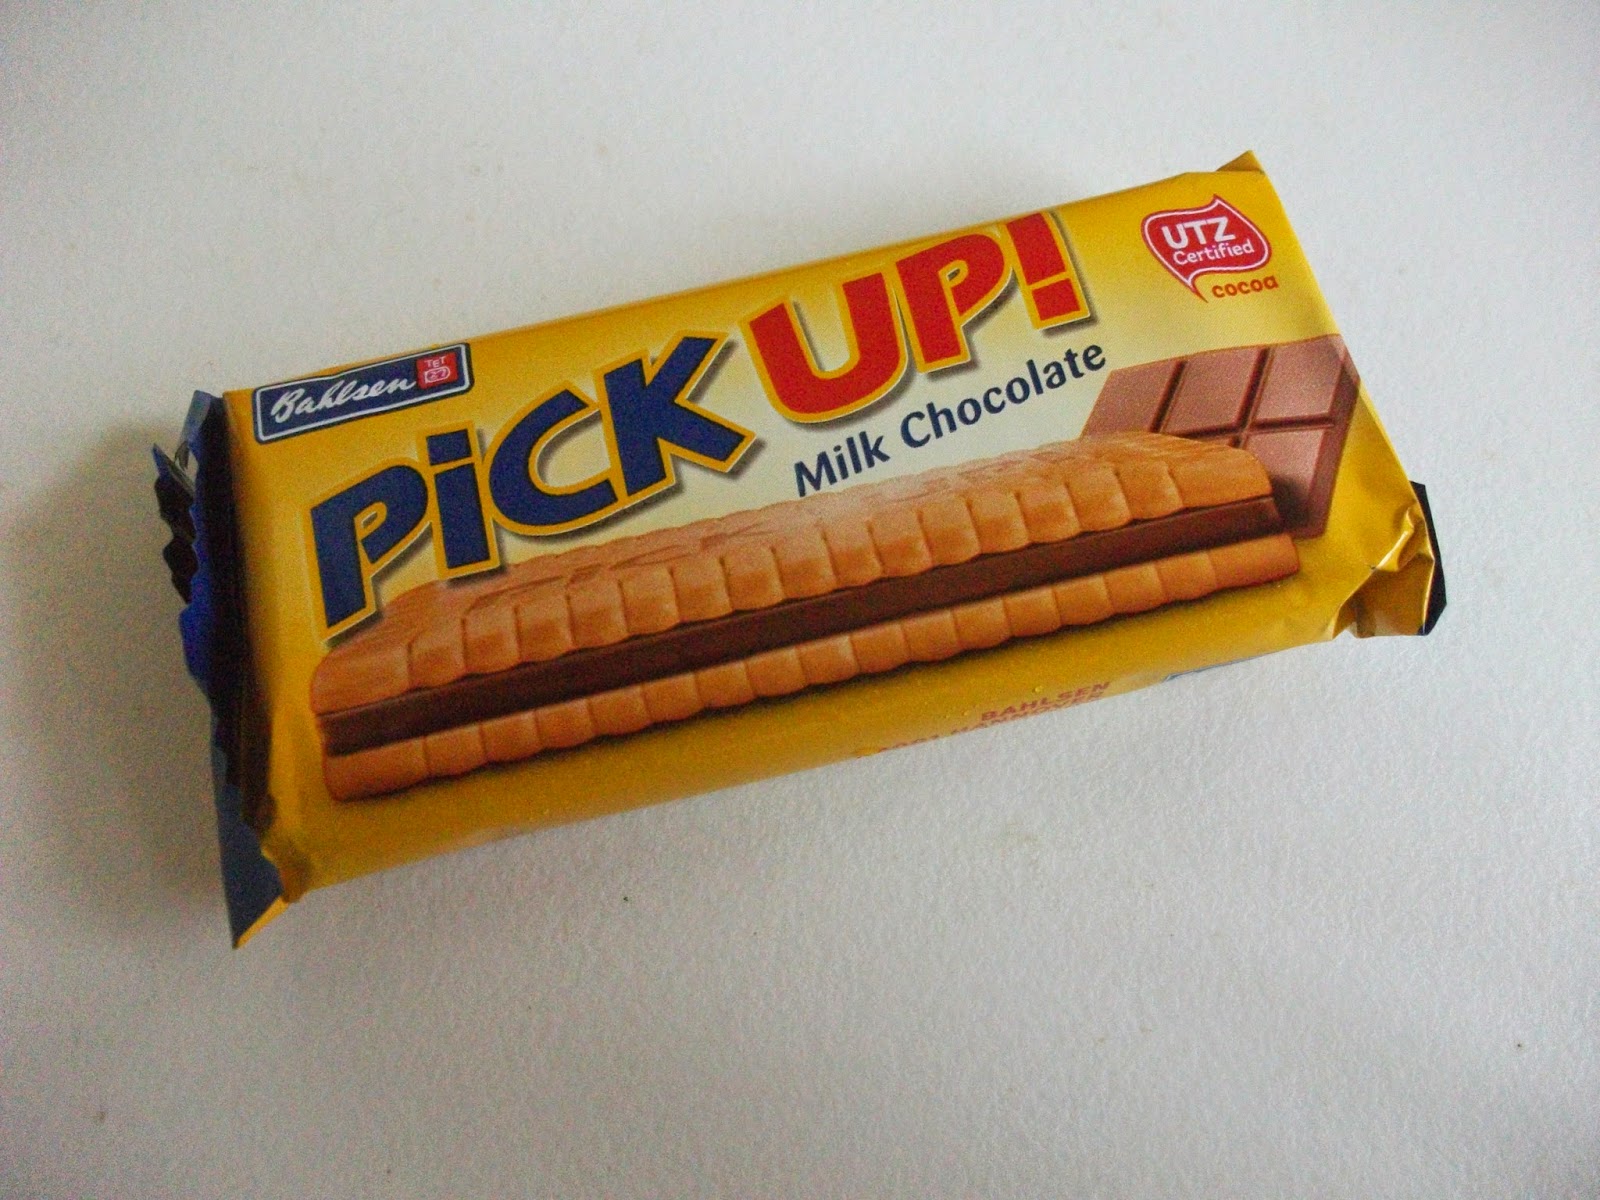 Bahlsen Pick Up! Milk Chocolate Biscuit Bars Review